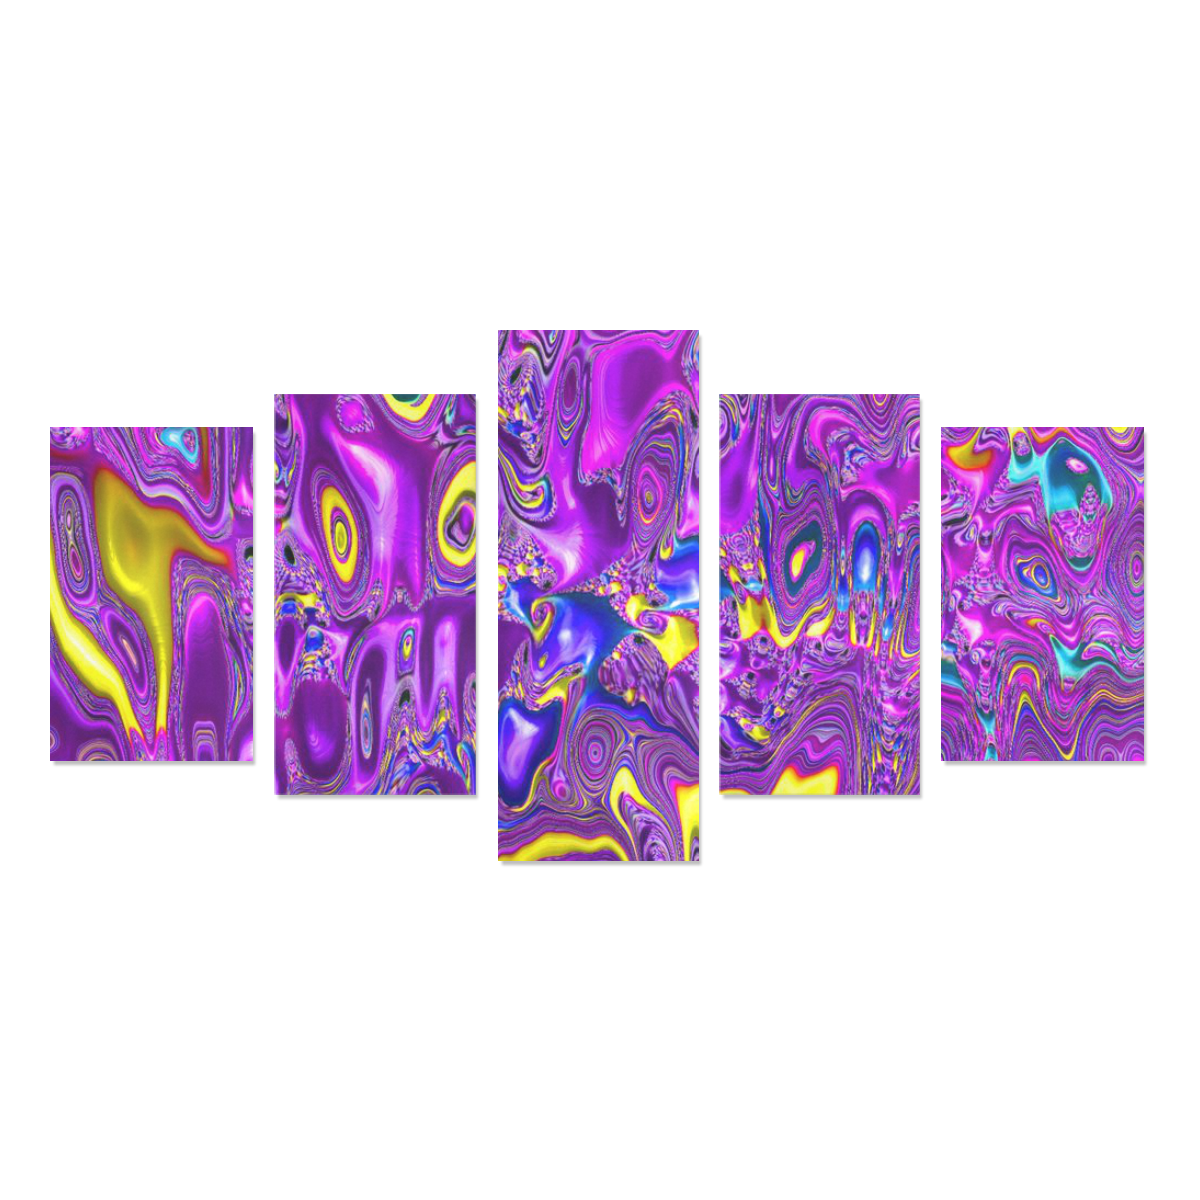 melted fractal 1A by JamColors Canvas Print Sets C (No Frame)